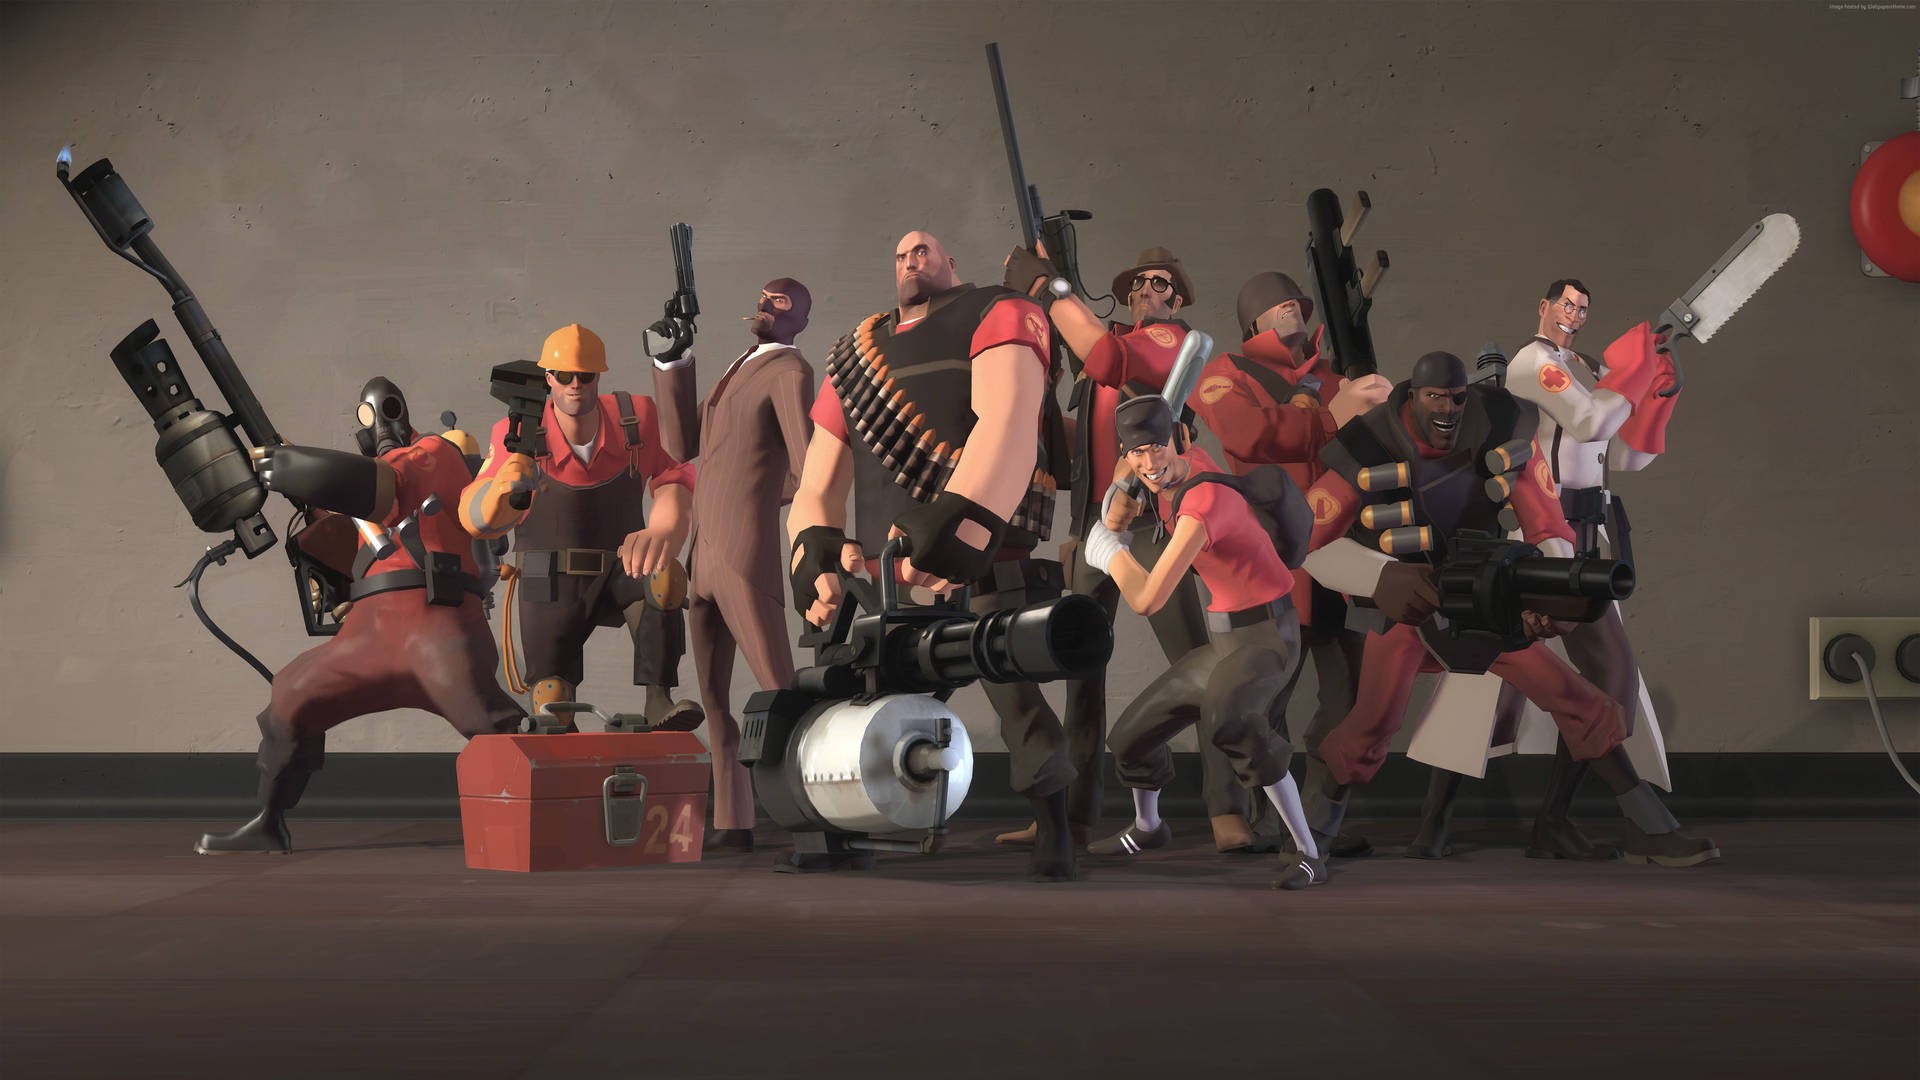 Valve Team Fortress 2 is actually getting an 'updatesized update' in